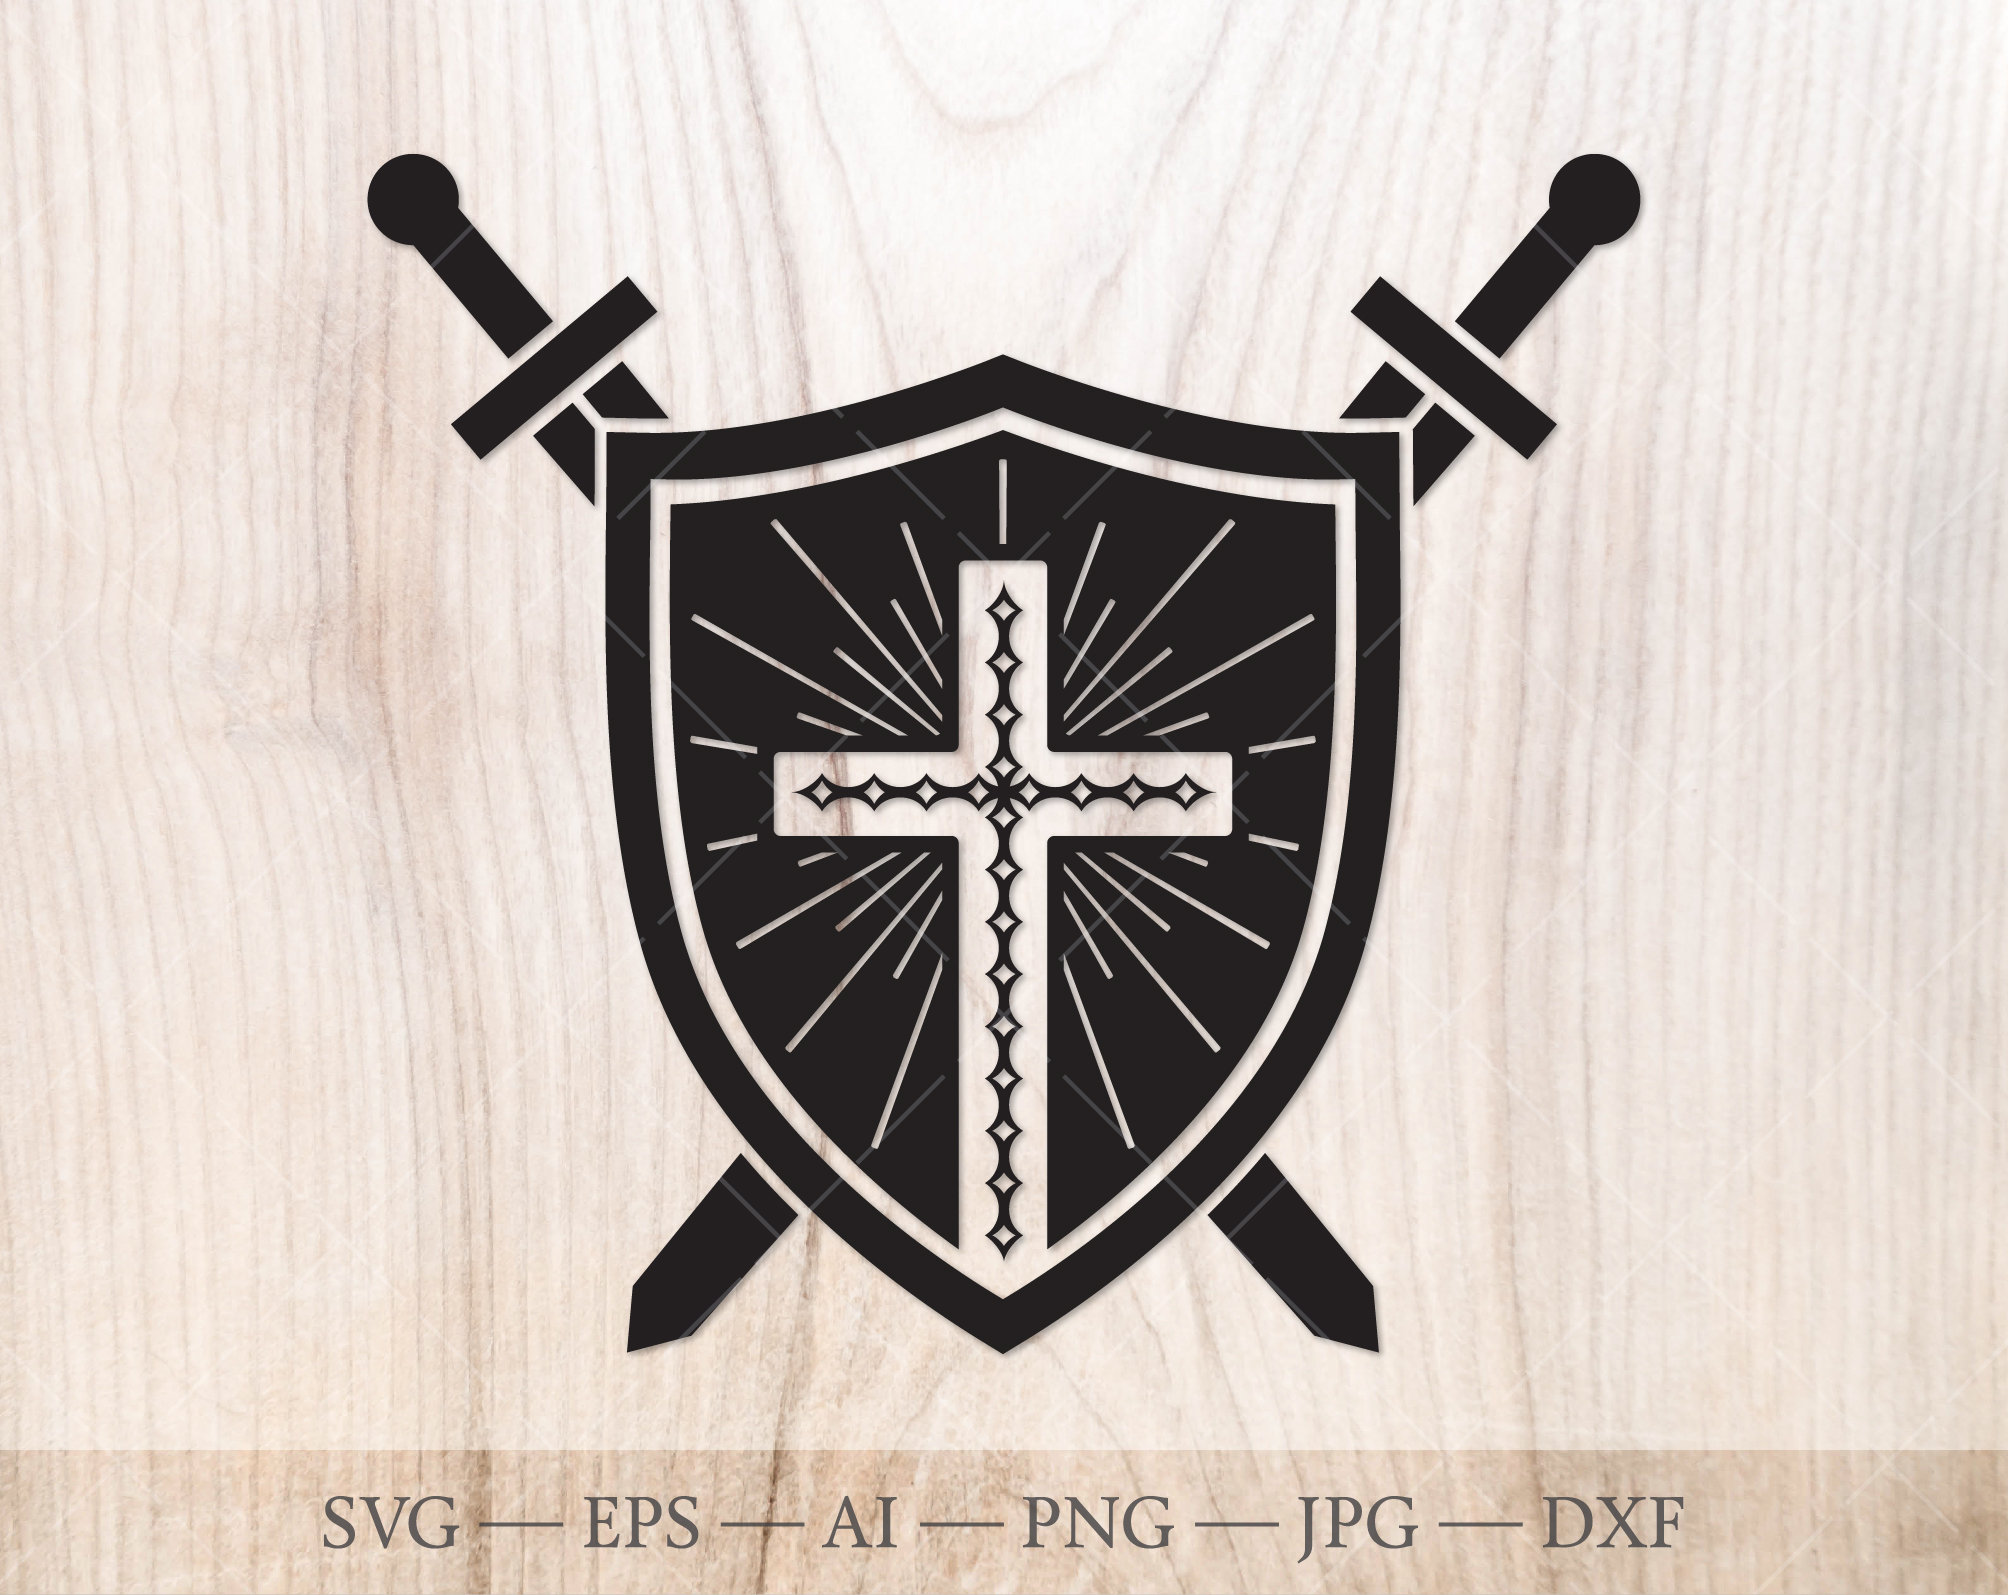 Crossed swords and a shield Royalty Free Stock SVG Vector